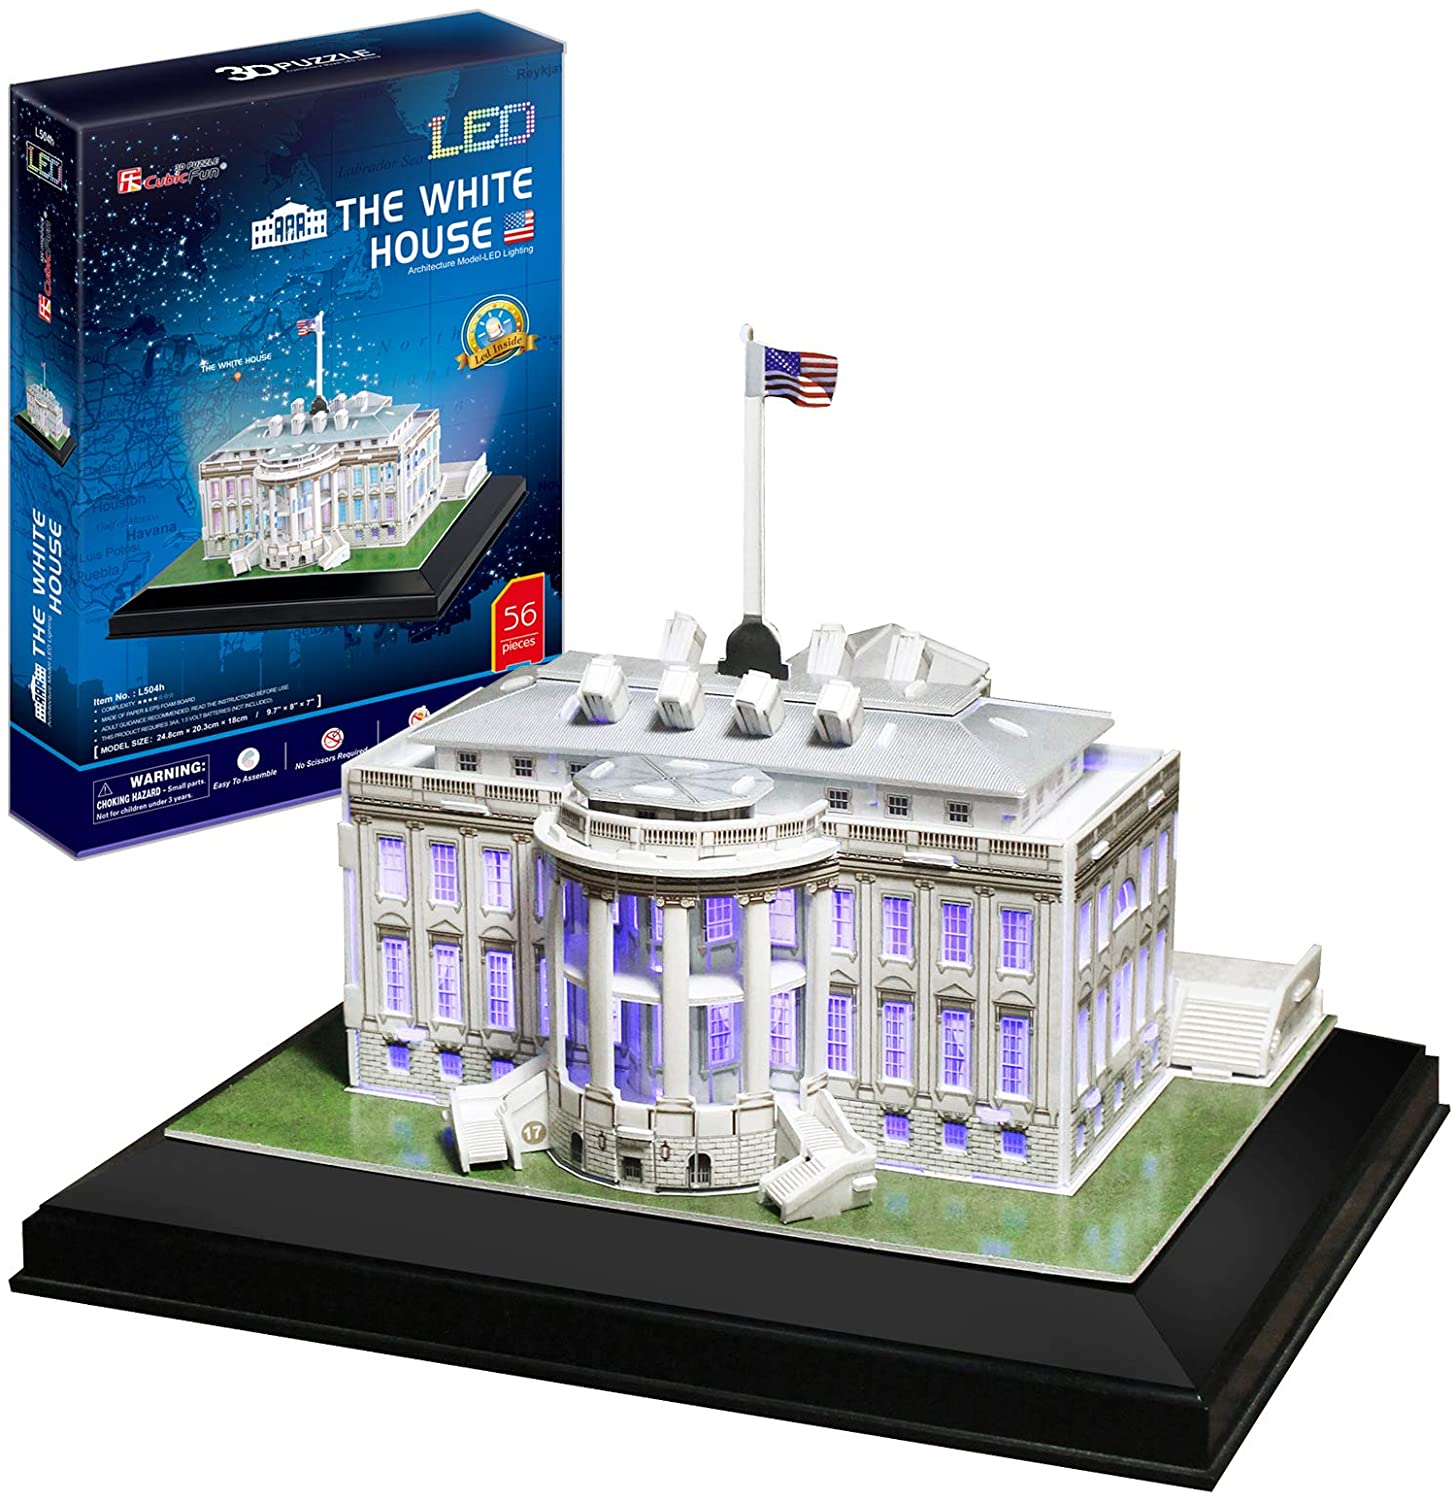 3D Puzzle: The White House LED | Impulse Games and Hobbies